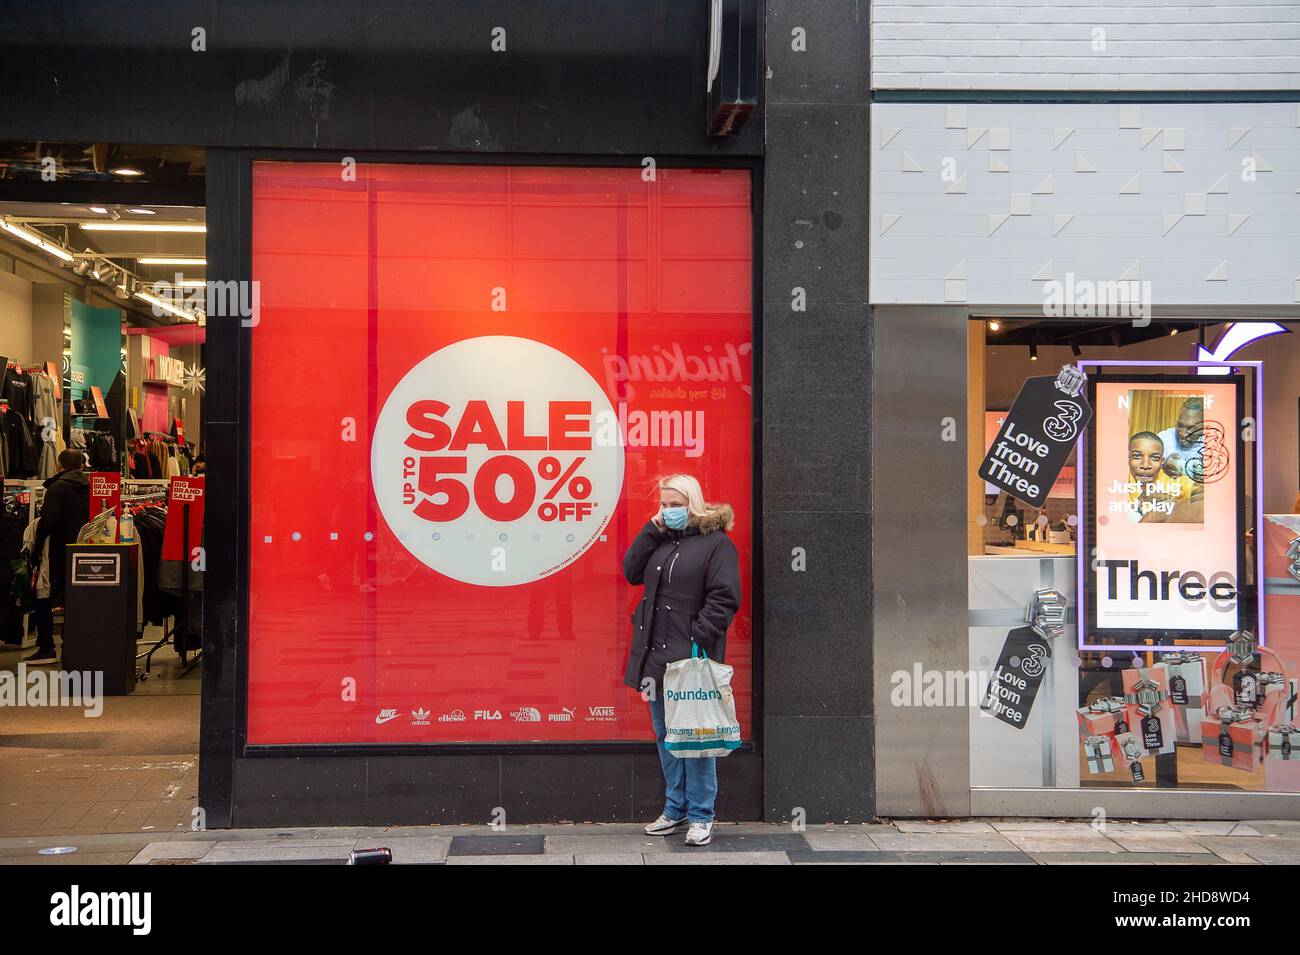 Slough, Berkshire, UK. 30th  December, 2021. It was a quiet day in Slough town centre today as people are back to work following the Christmas break. Credit: Maureen McLean/Alamy Stock Photo